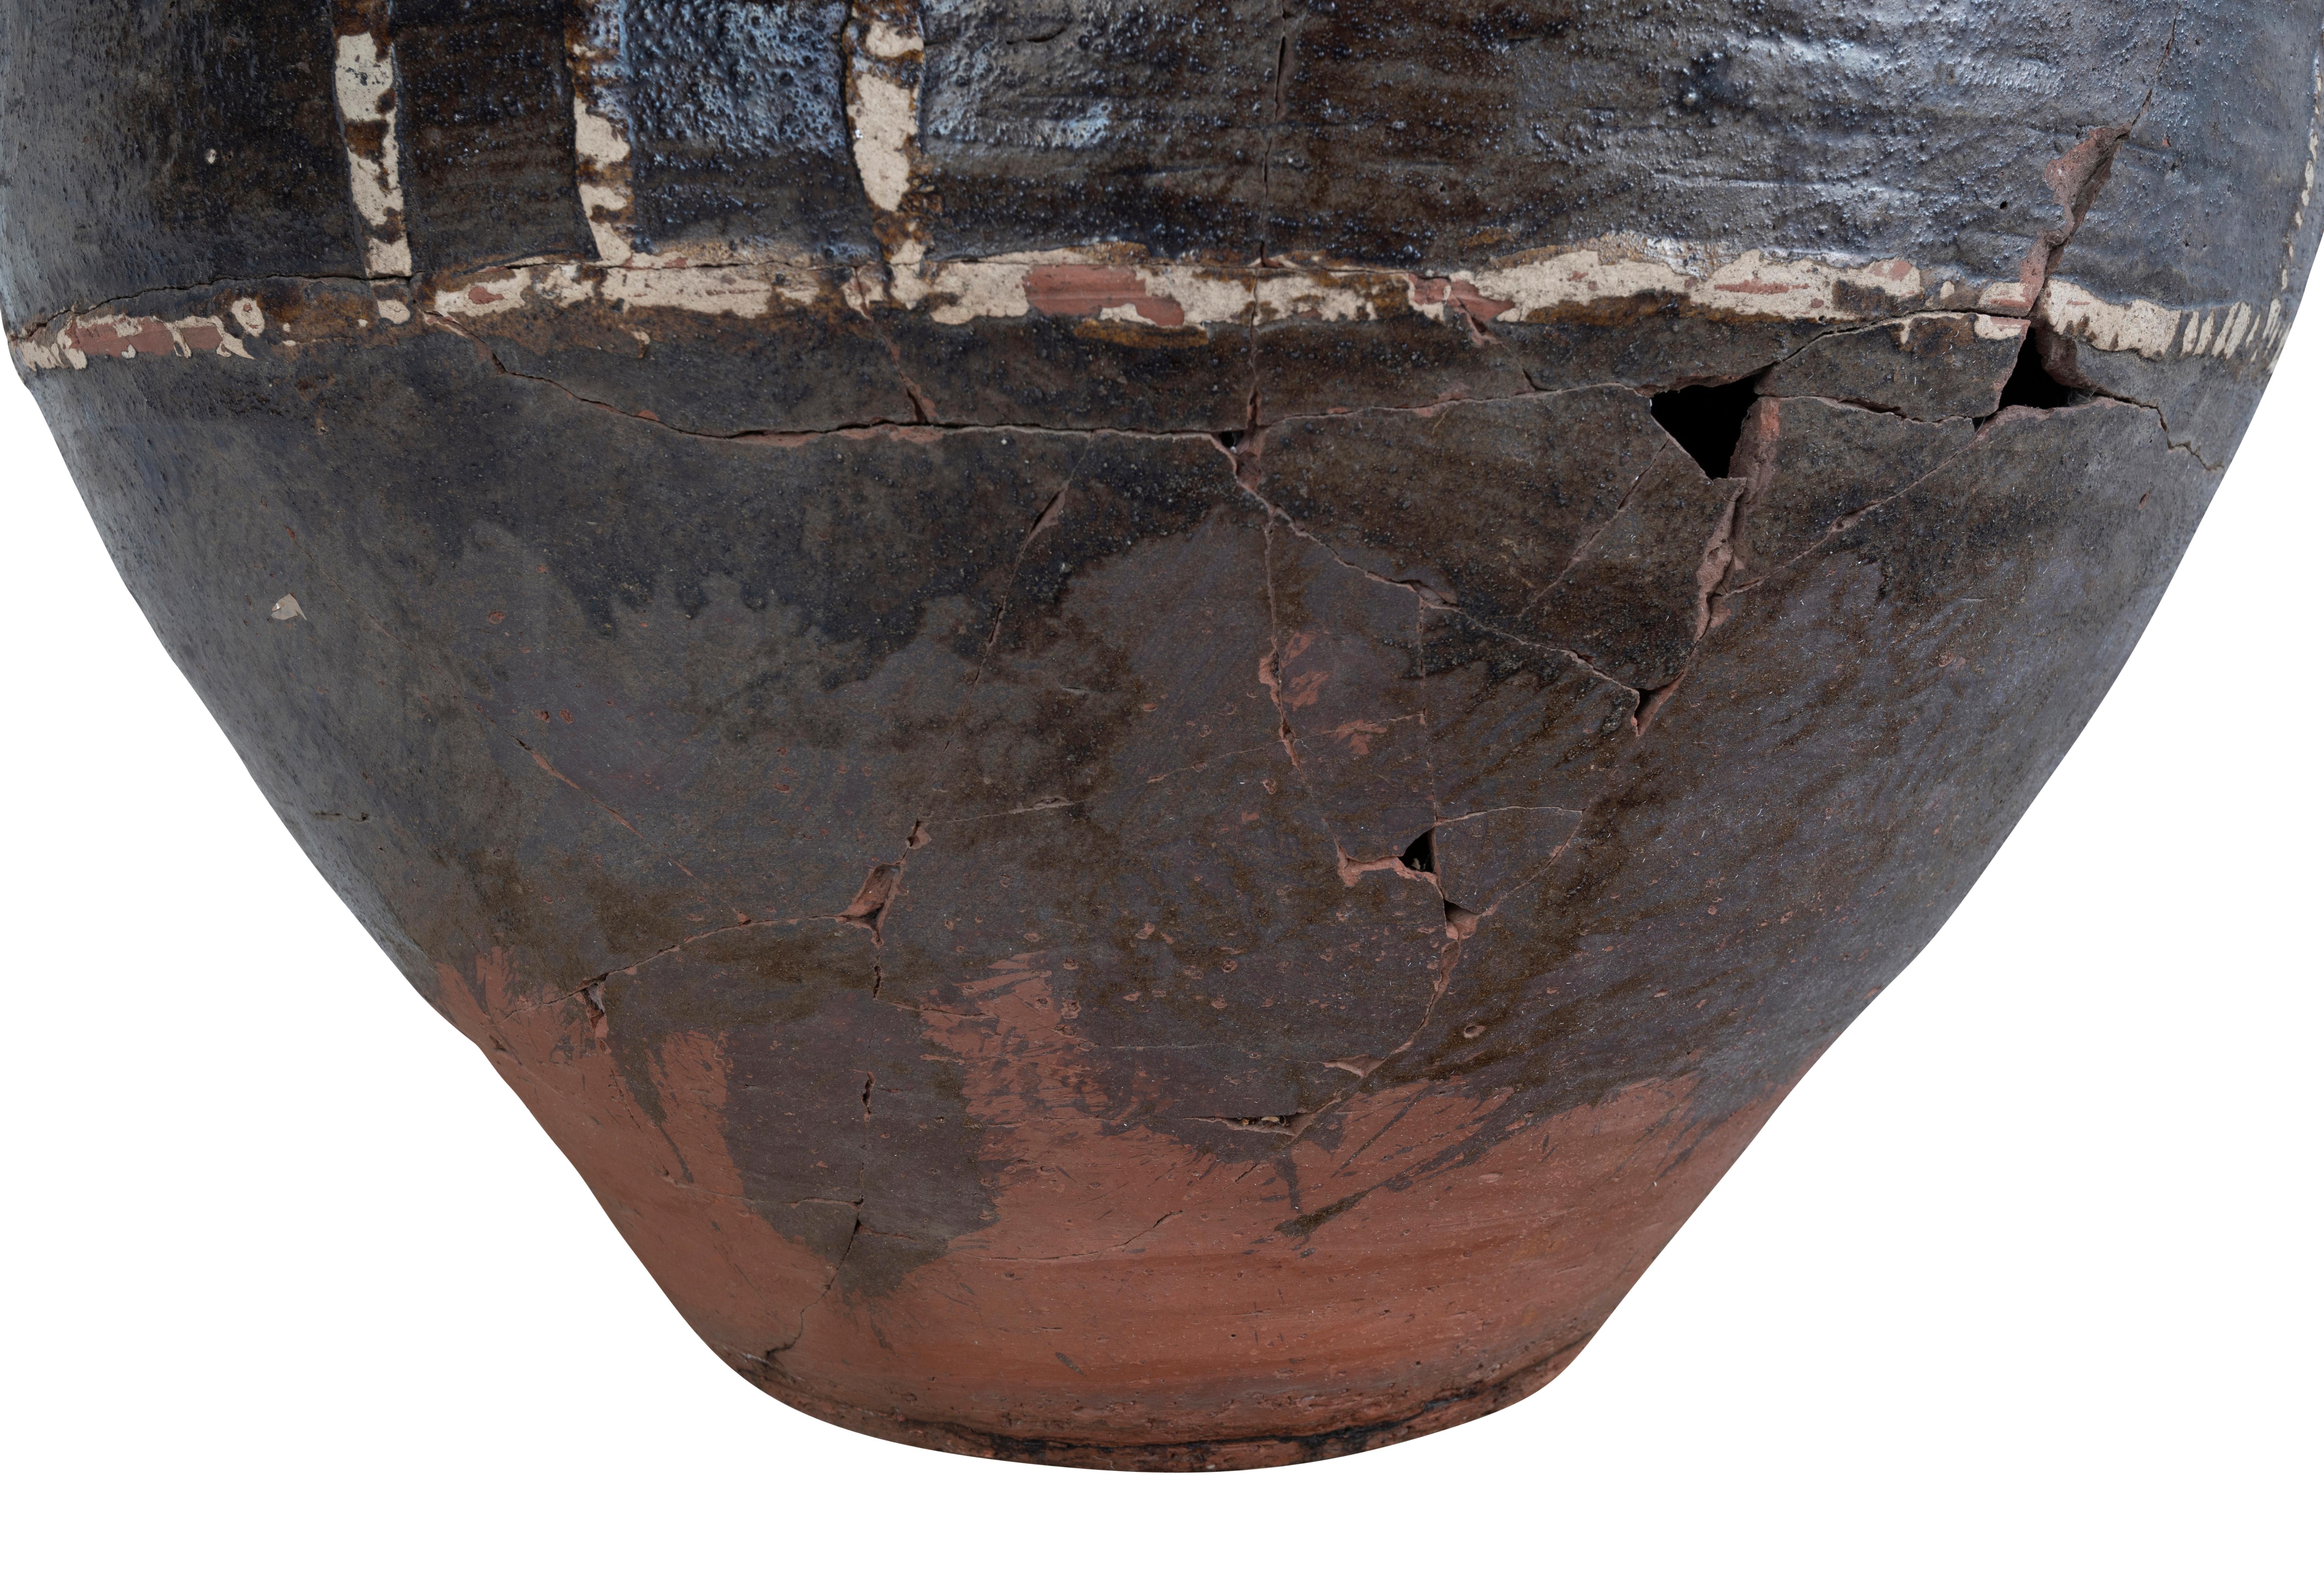 Chinese Export Monumental Cracked Chinese Oil Jar with Repairs  For Sale